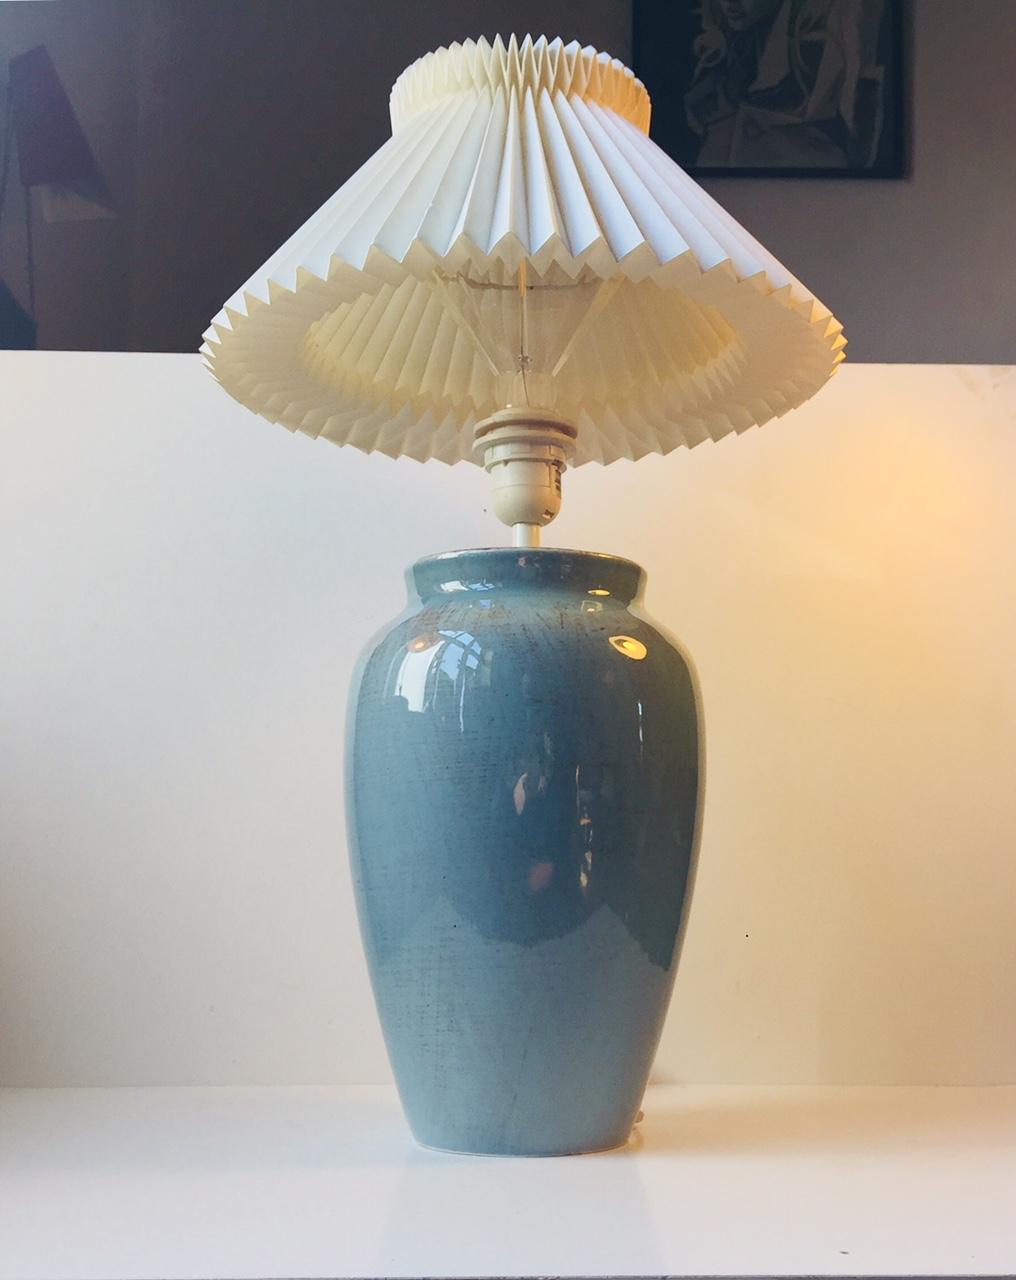 Large Turquoise pottery table light from the Danish lighting company Vitrika & Junge. This company only existed for a few years. The ceramic corpus was most likely manufactured at Palshus for Vitrika during the 1970s. The shade is not included.